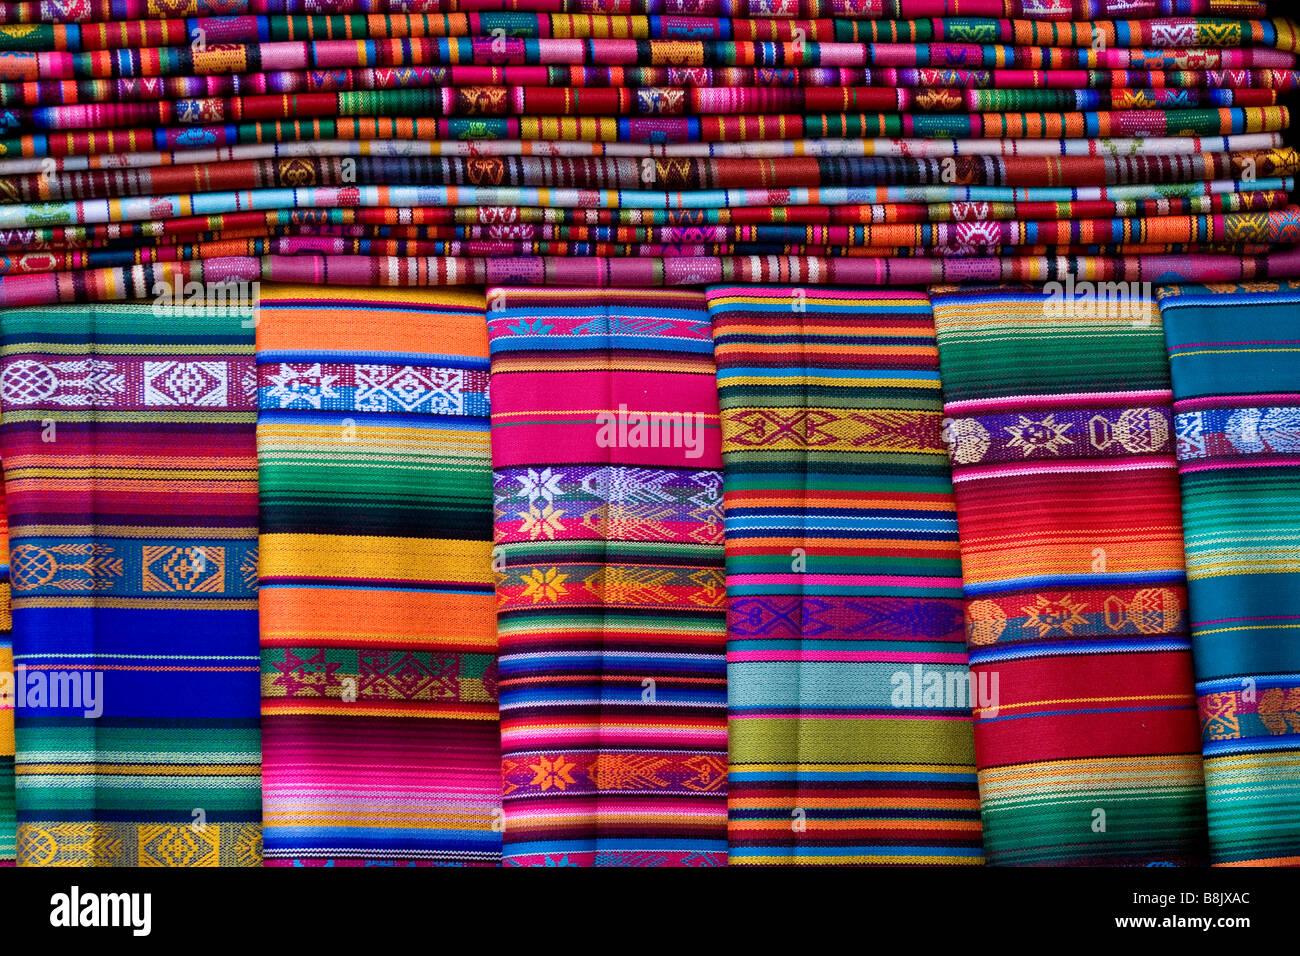 Colorful woven fabrics for sale in outdoor market in Santa Fe, New Mexico Stock Photo